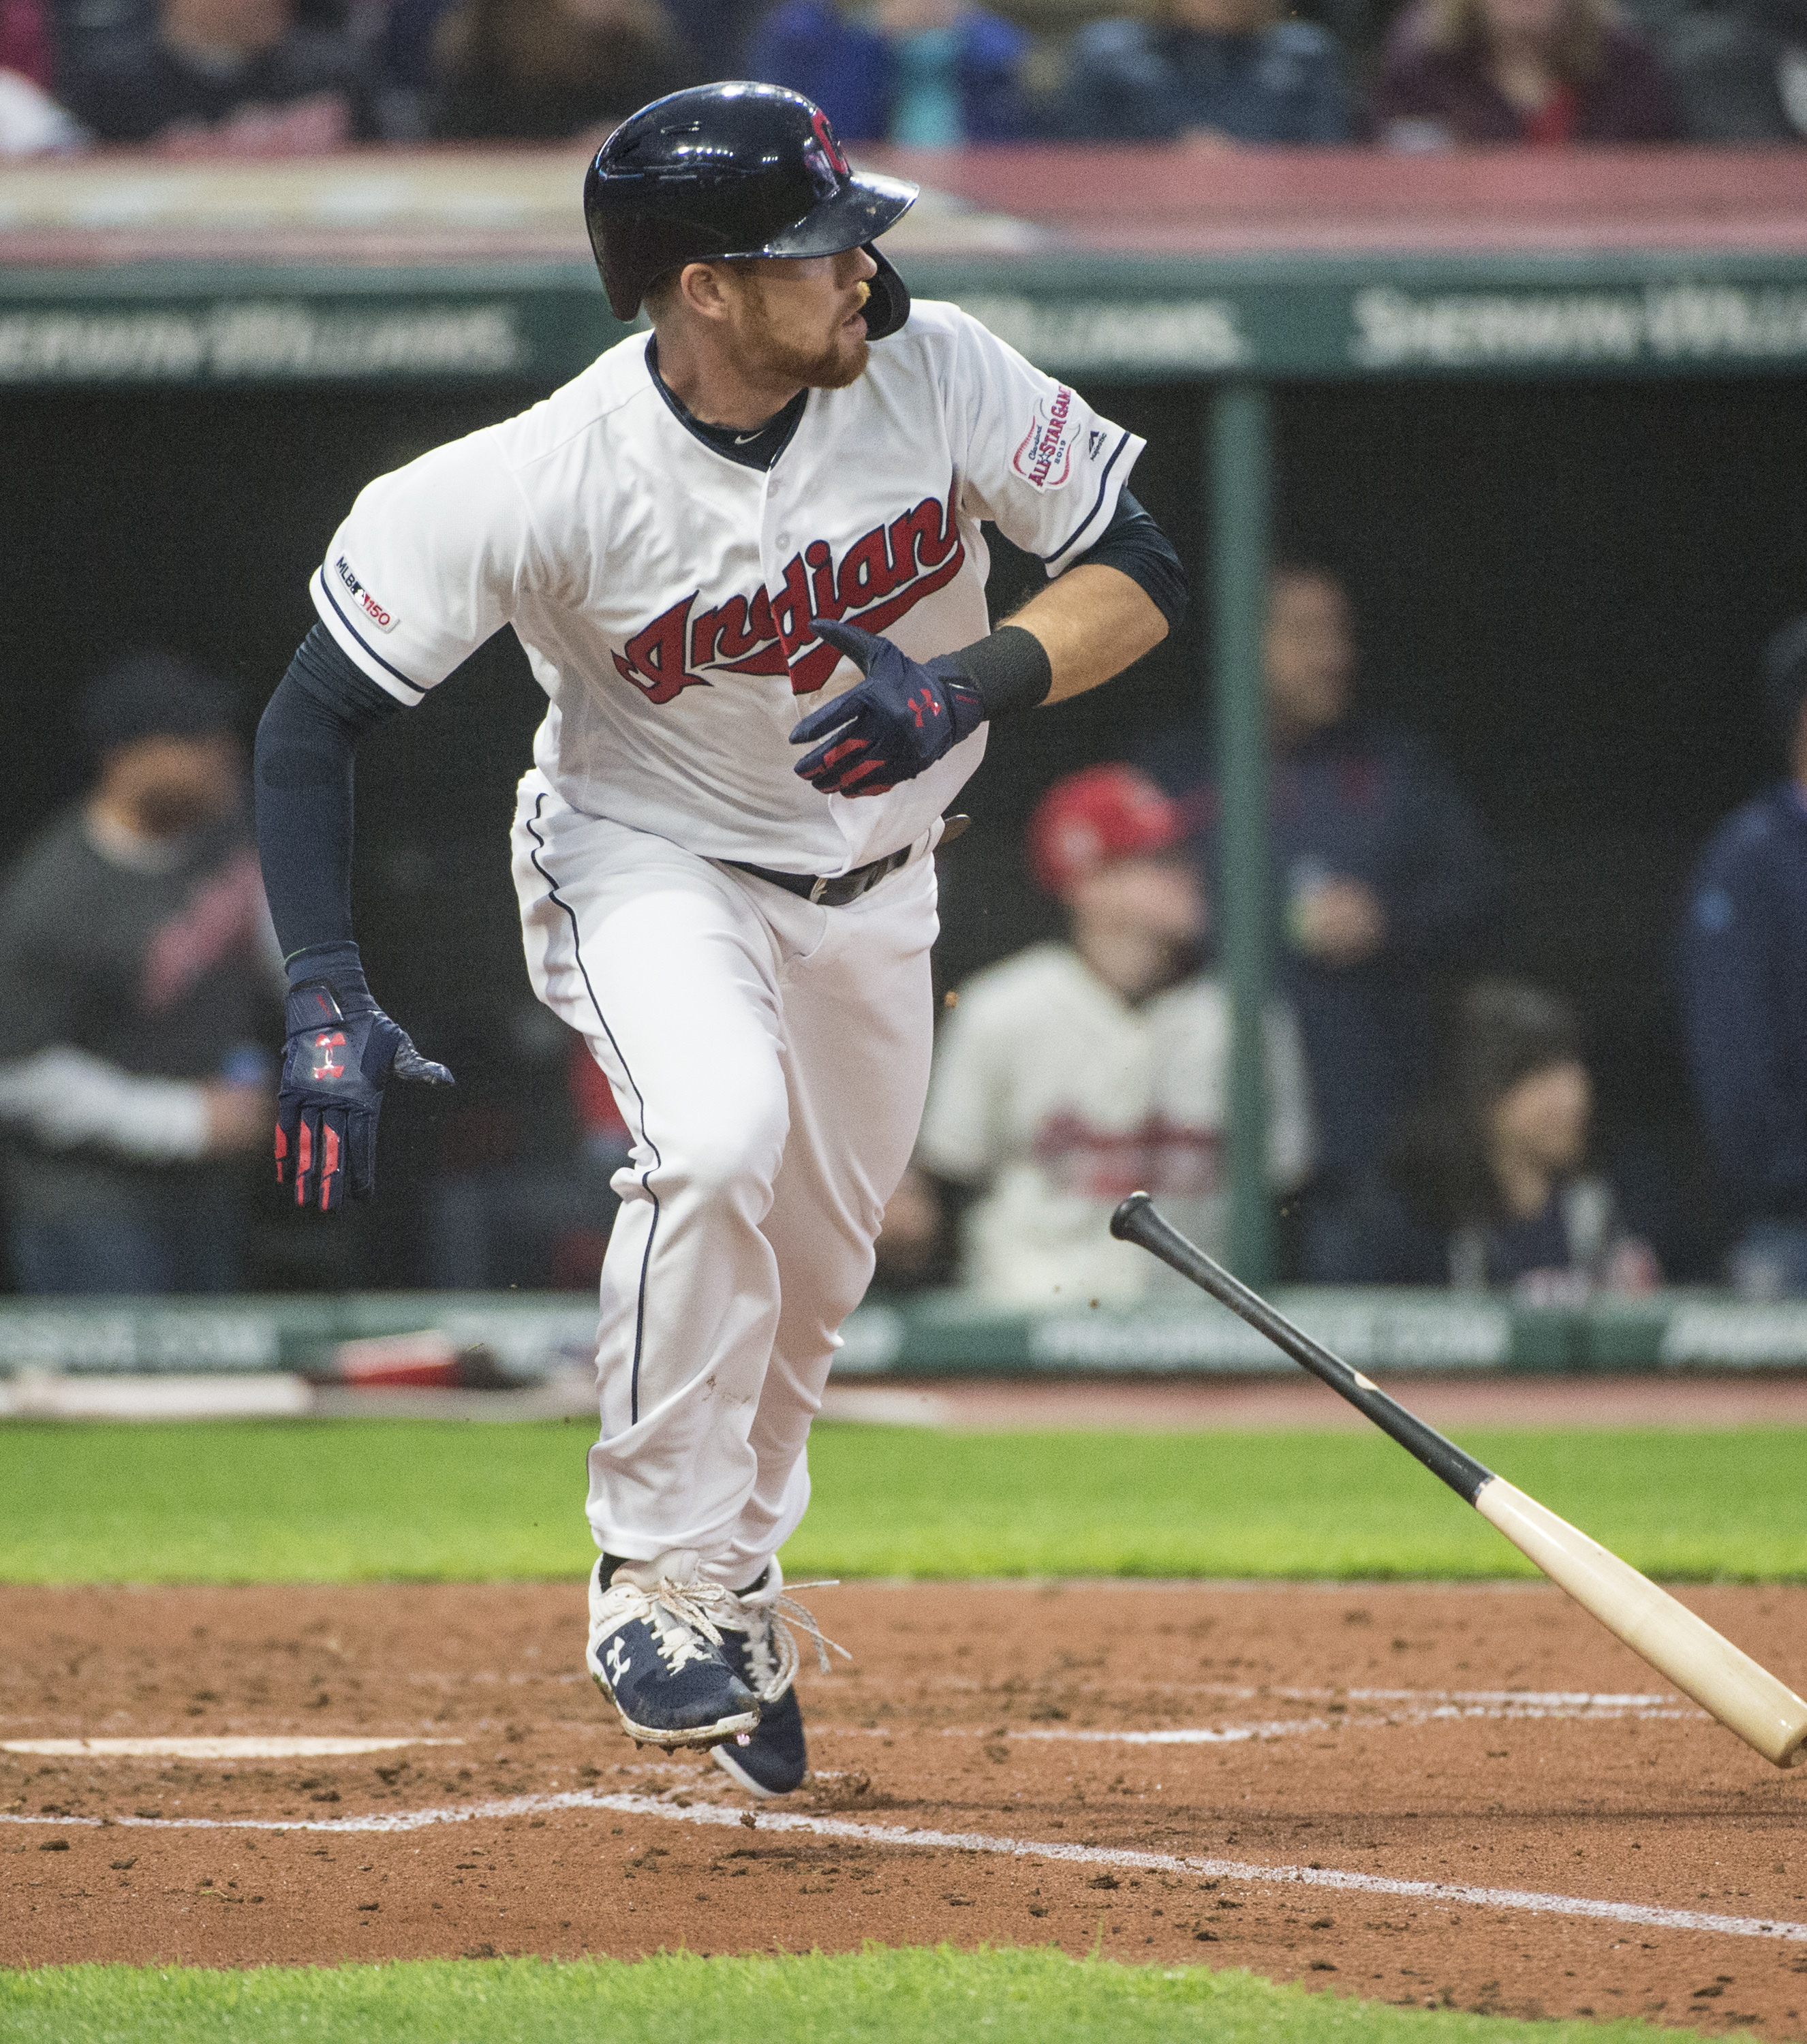 Naquin’s pinch-hit single in 9th lifts Indians past Mariners